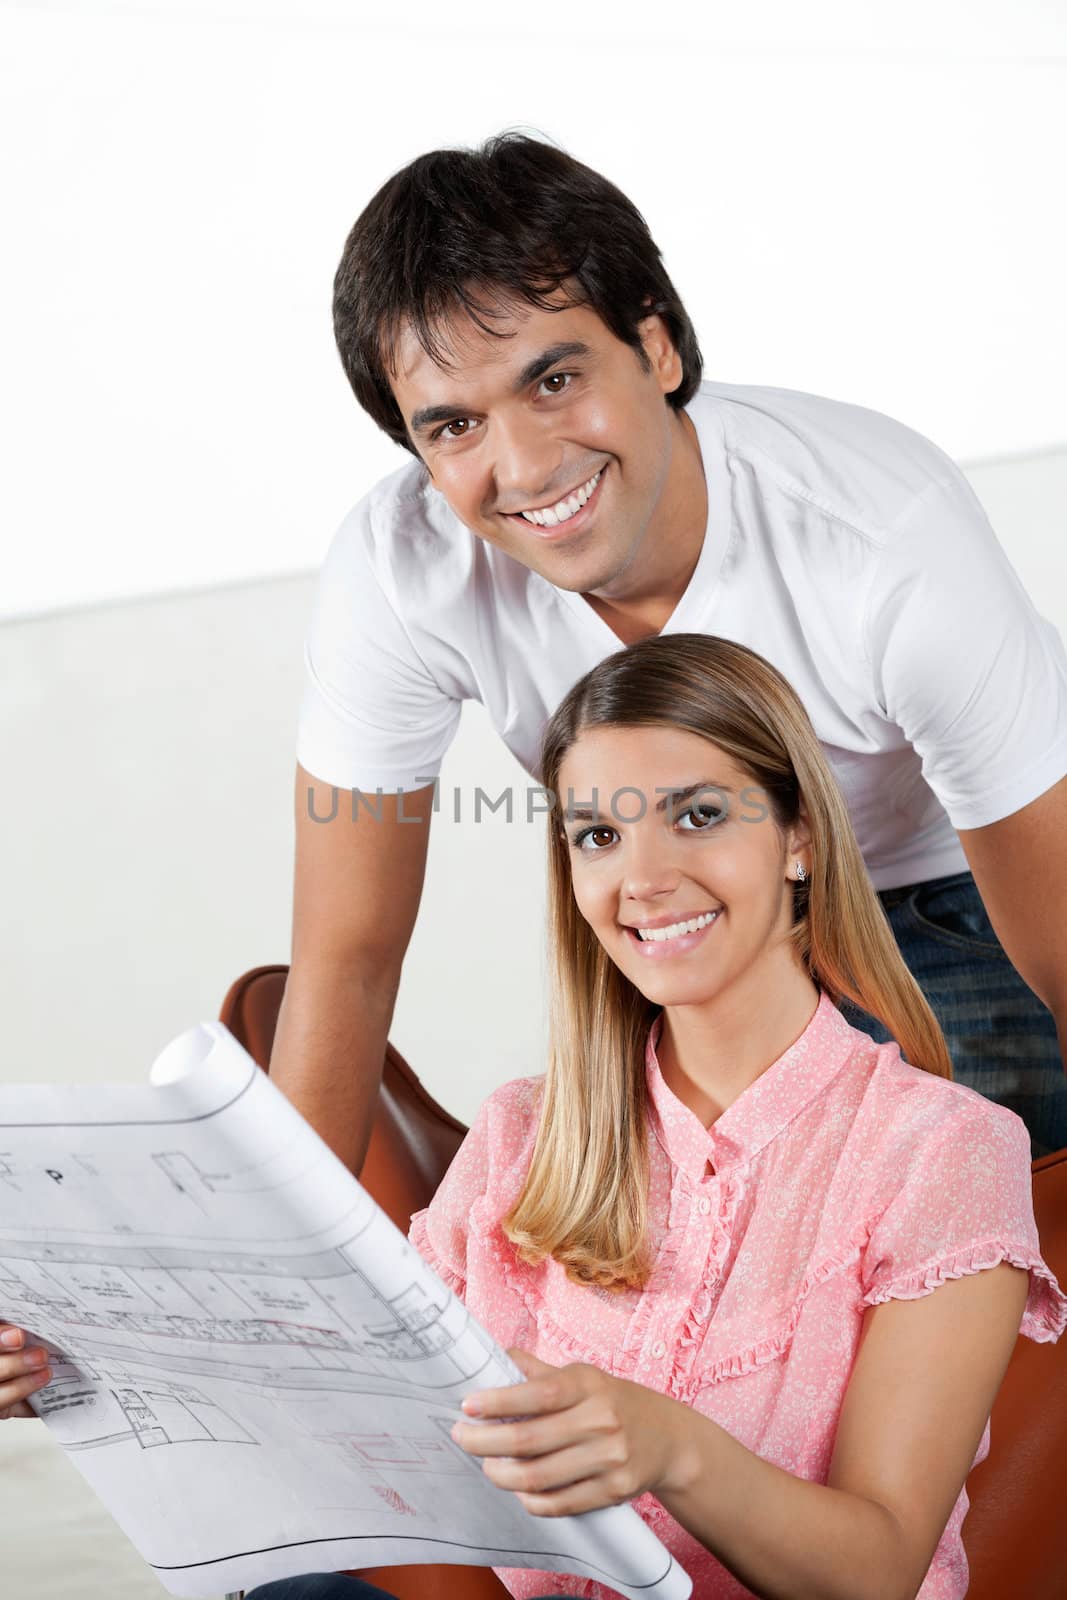 Portrait of young man smiling with woman holding blueprint